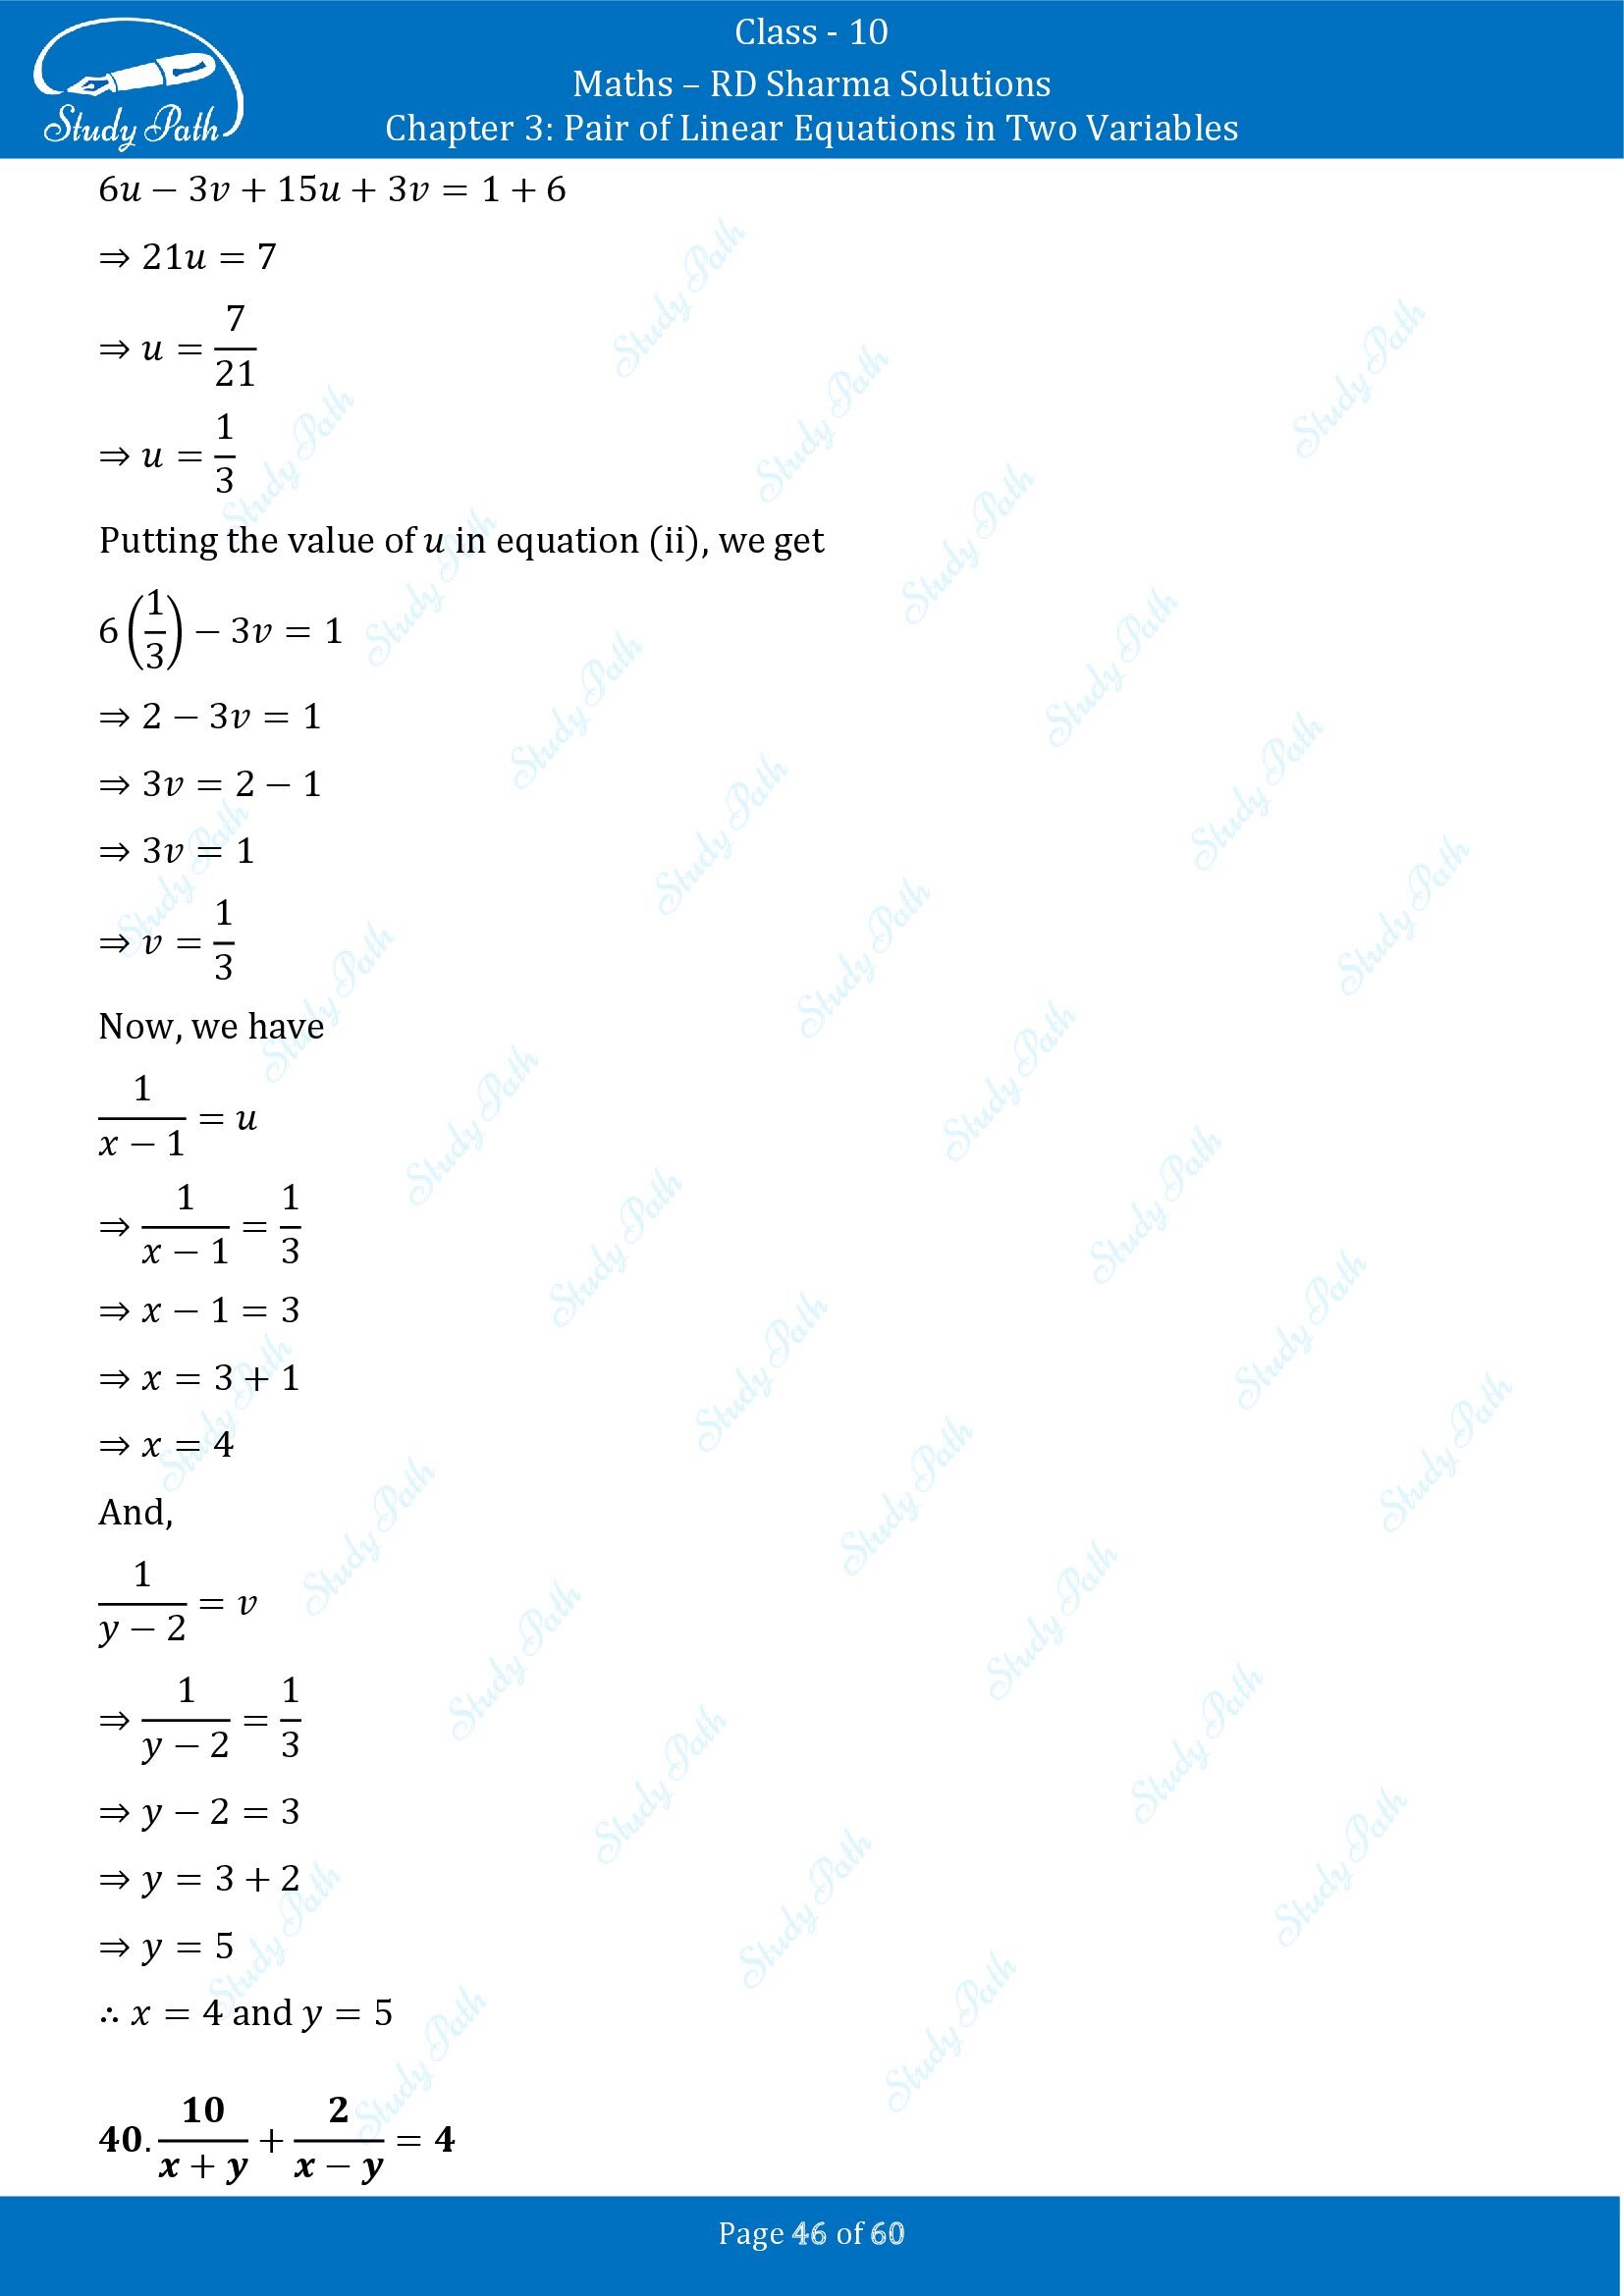 RD Sharma Solutions Class 10 Chapter 3 Pair of Linear Equations in Two Variables Exercise 3.3 00046